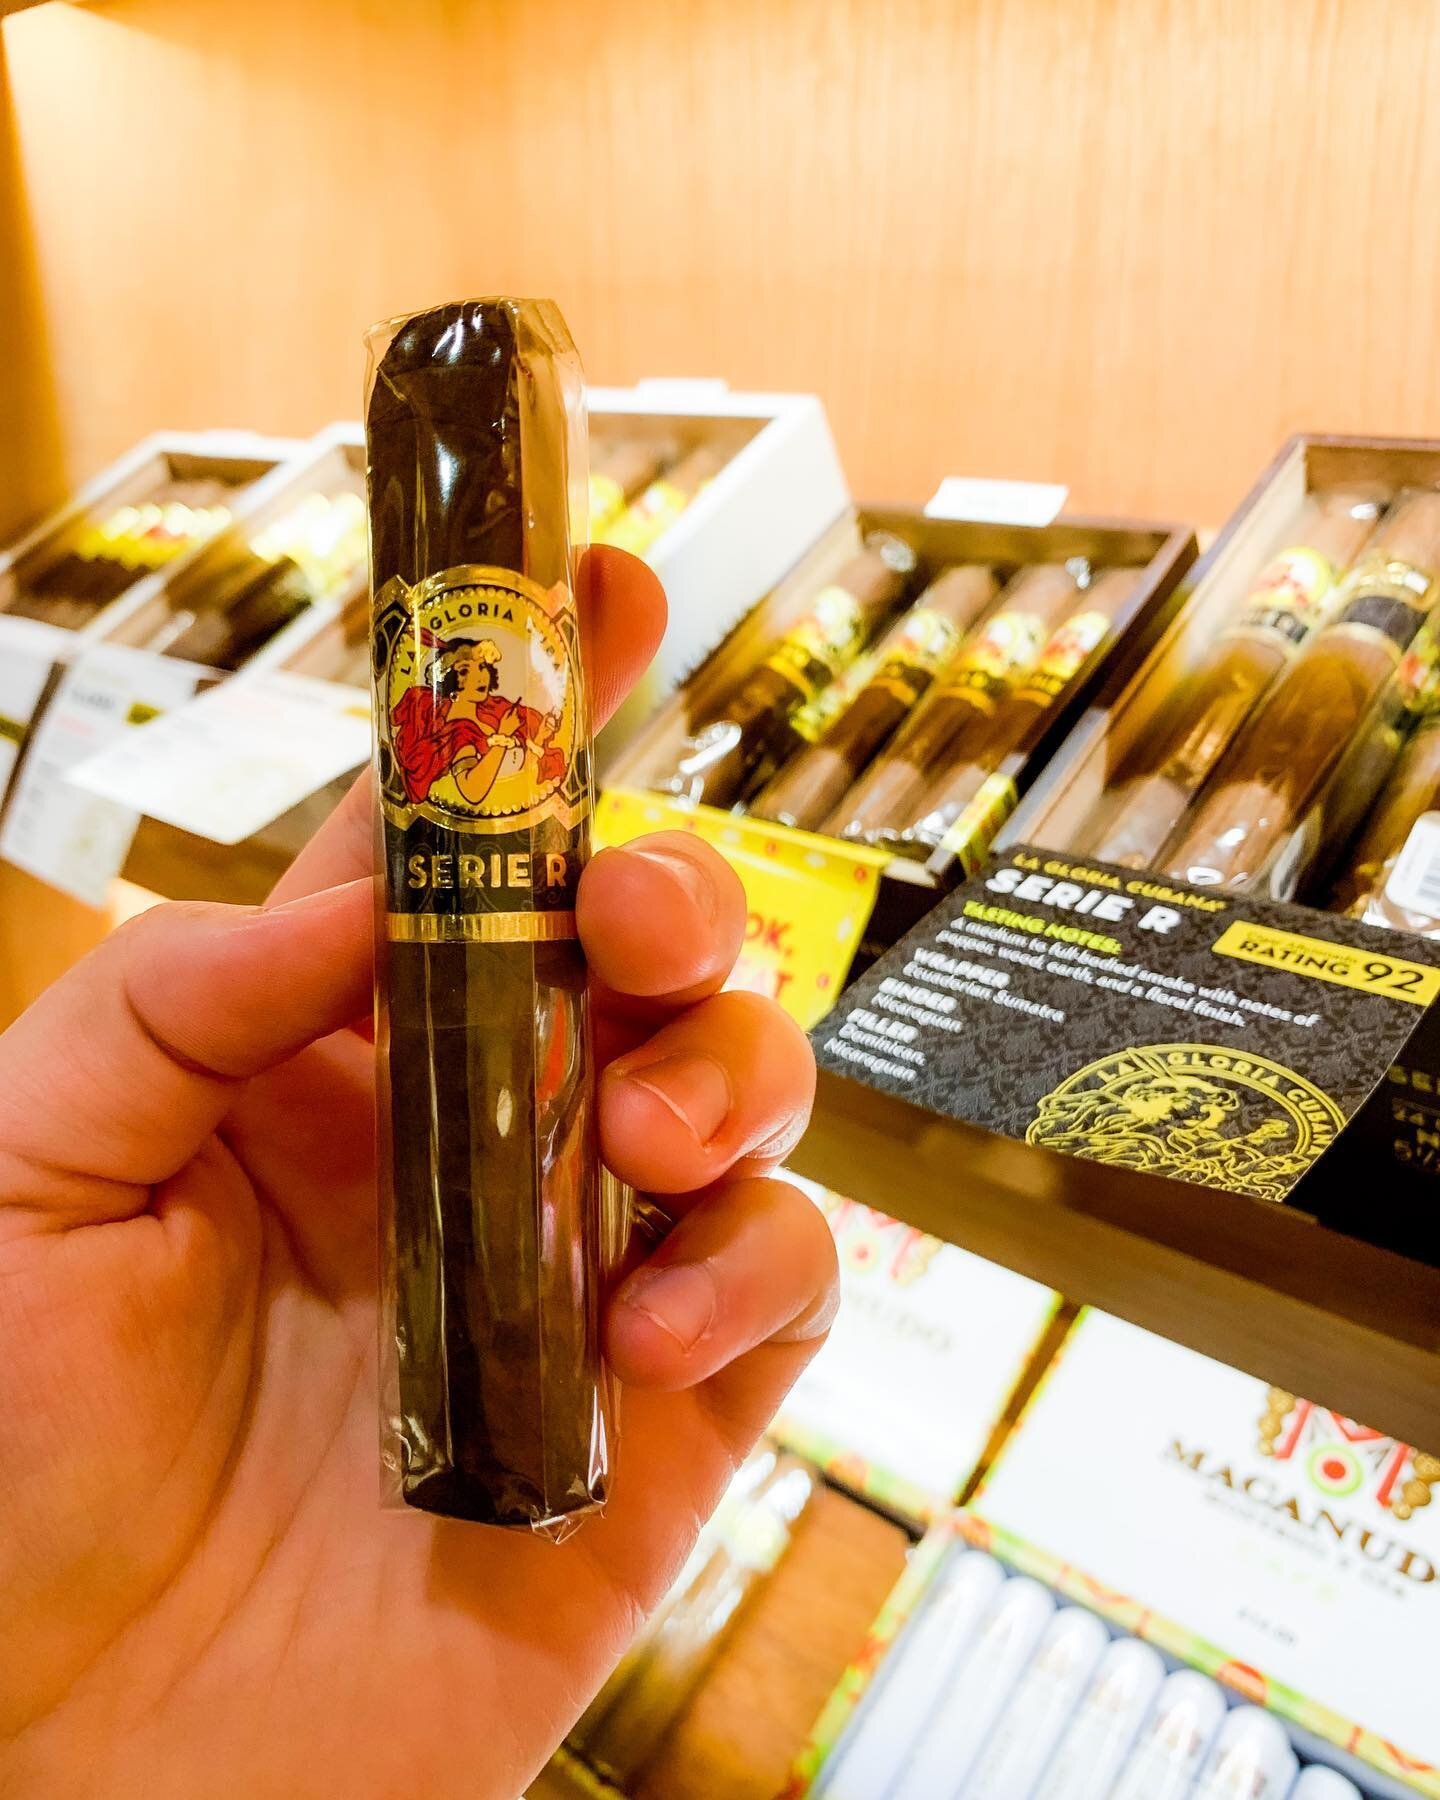 These La Gloria Cubanas have been making quite the buzz lately!! The Serie R carries the honor of a 92-rating 🤩

Come try one and see what all the fuss is about 🏃💨

#exploregeorgia #pickellijay #ellijayga #ellijay #ellijaycigars #ellijaycigarloung